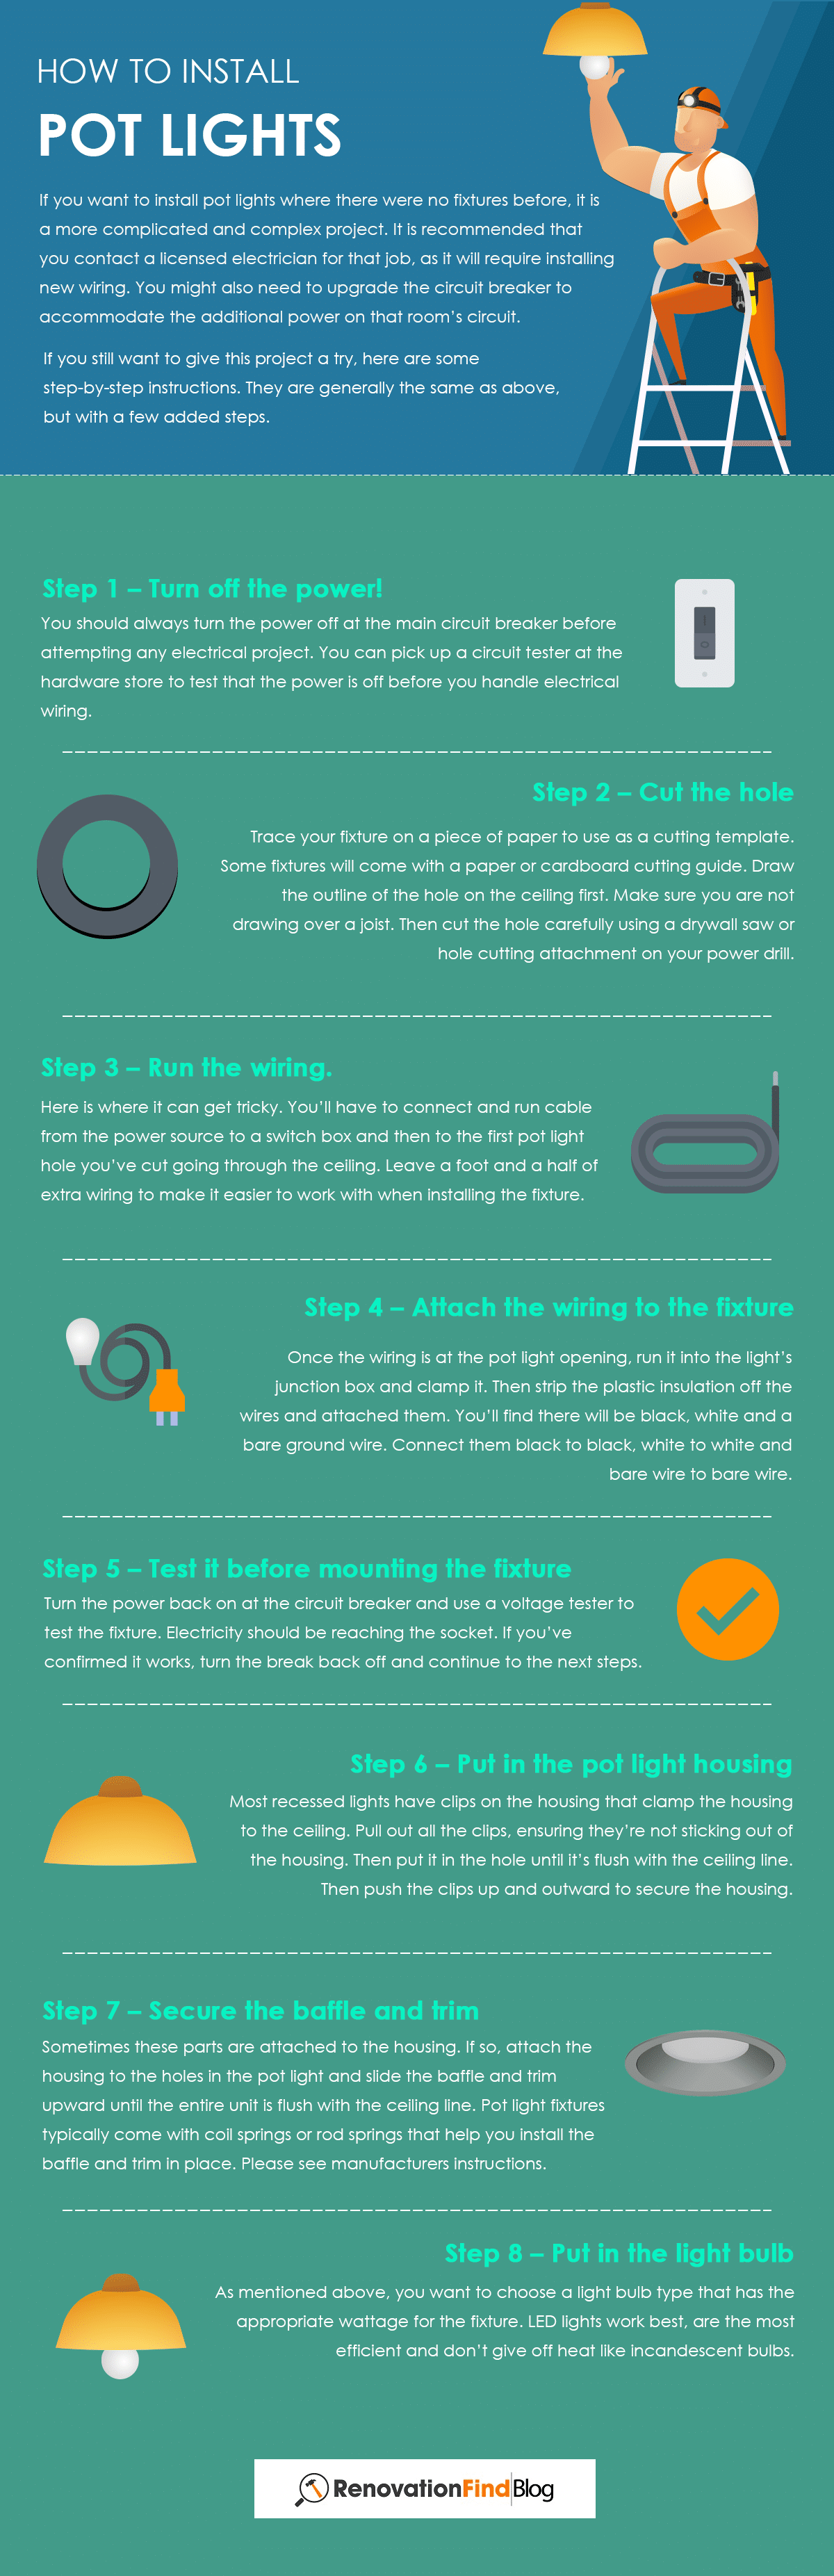 How To Install Pot Lights - Infographic